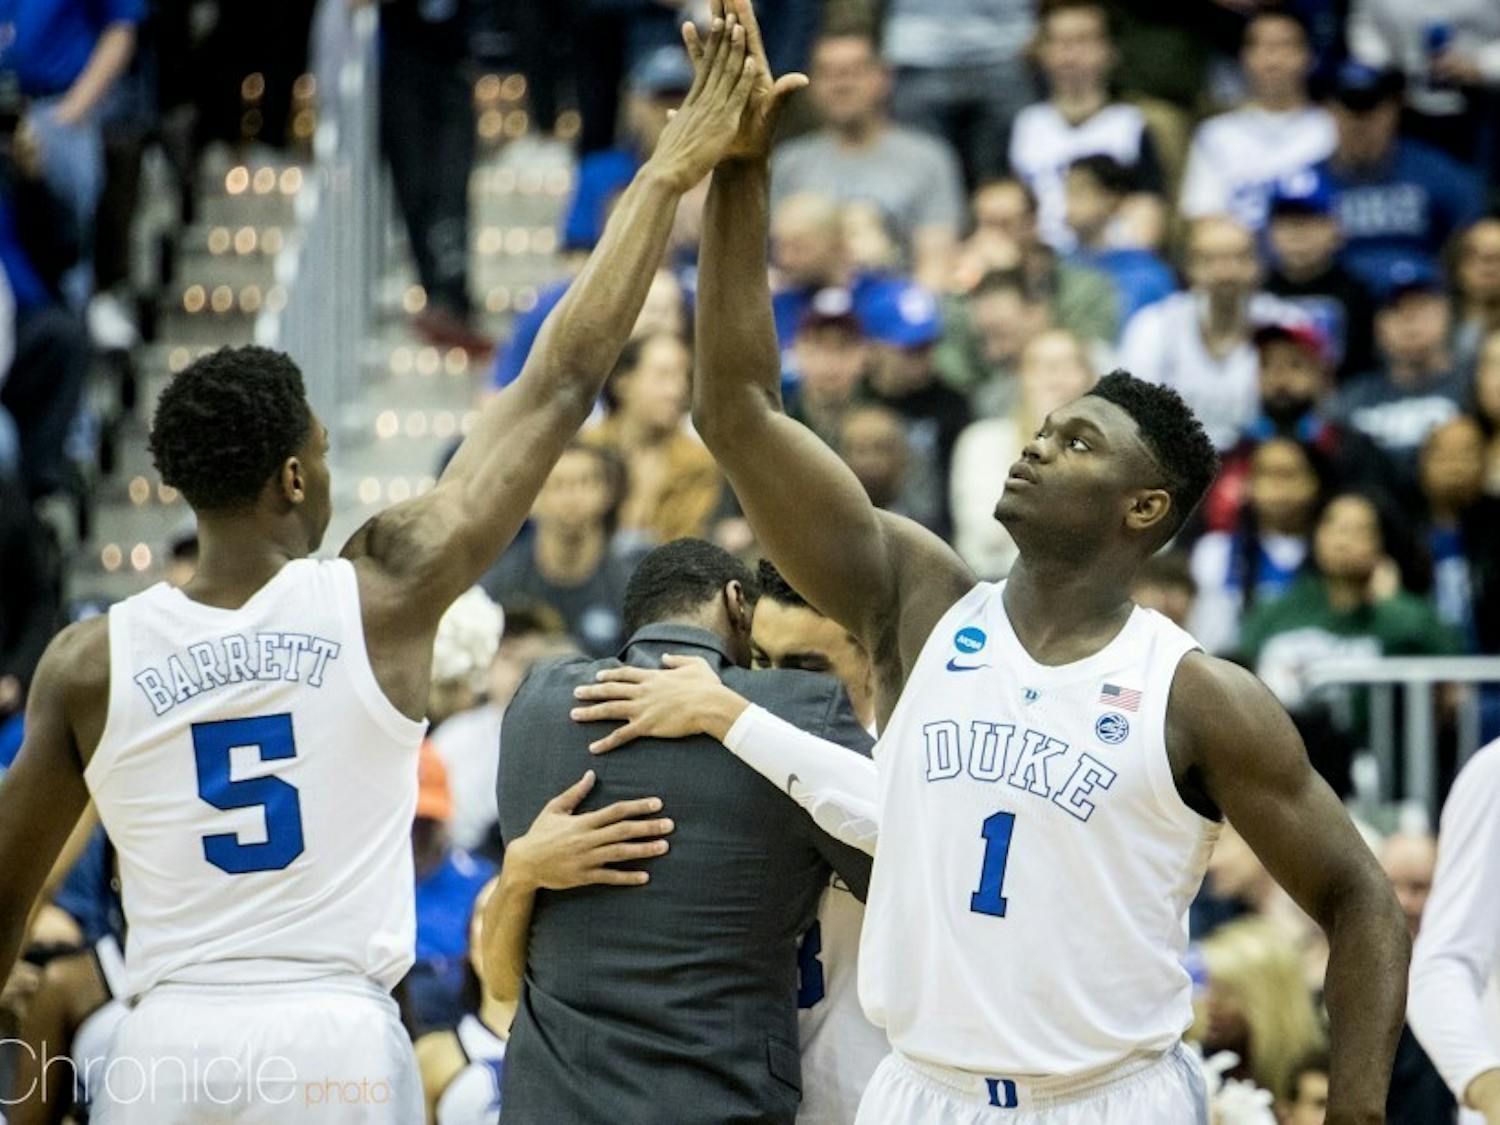 RJ Barrett played the hero for the Knicks Thursday, while there is still no timetable for Zion Williamson's (right) return to the NBA.